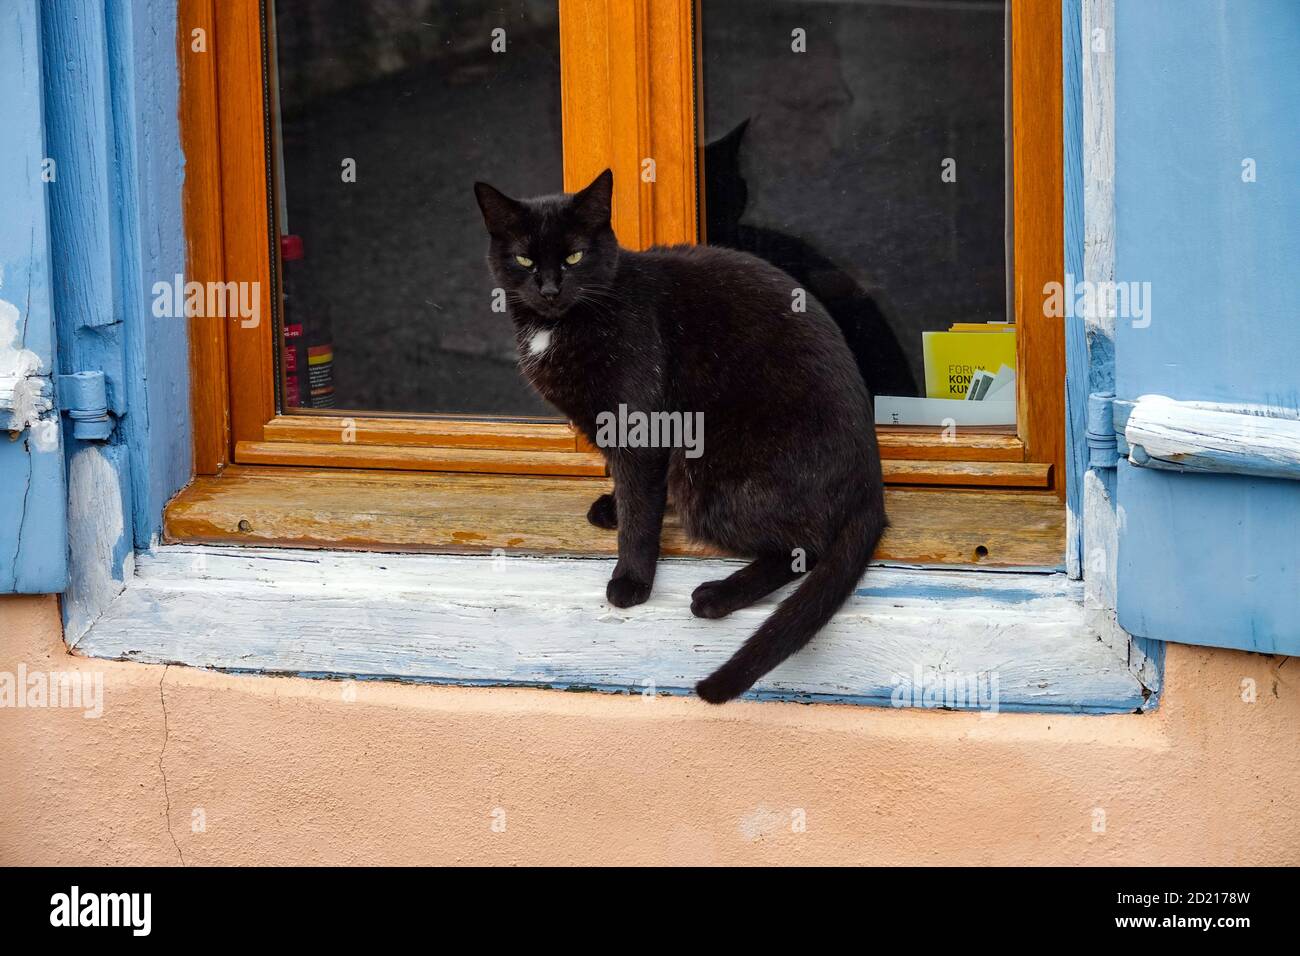 Black cat with white bib sitting on a window ledge, looking at the camera Stock Photo